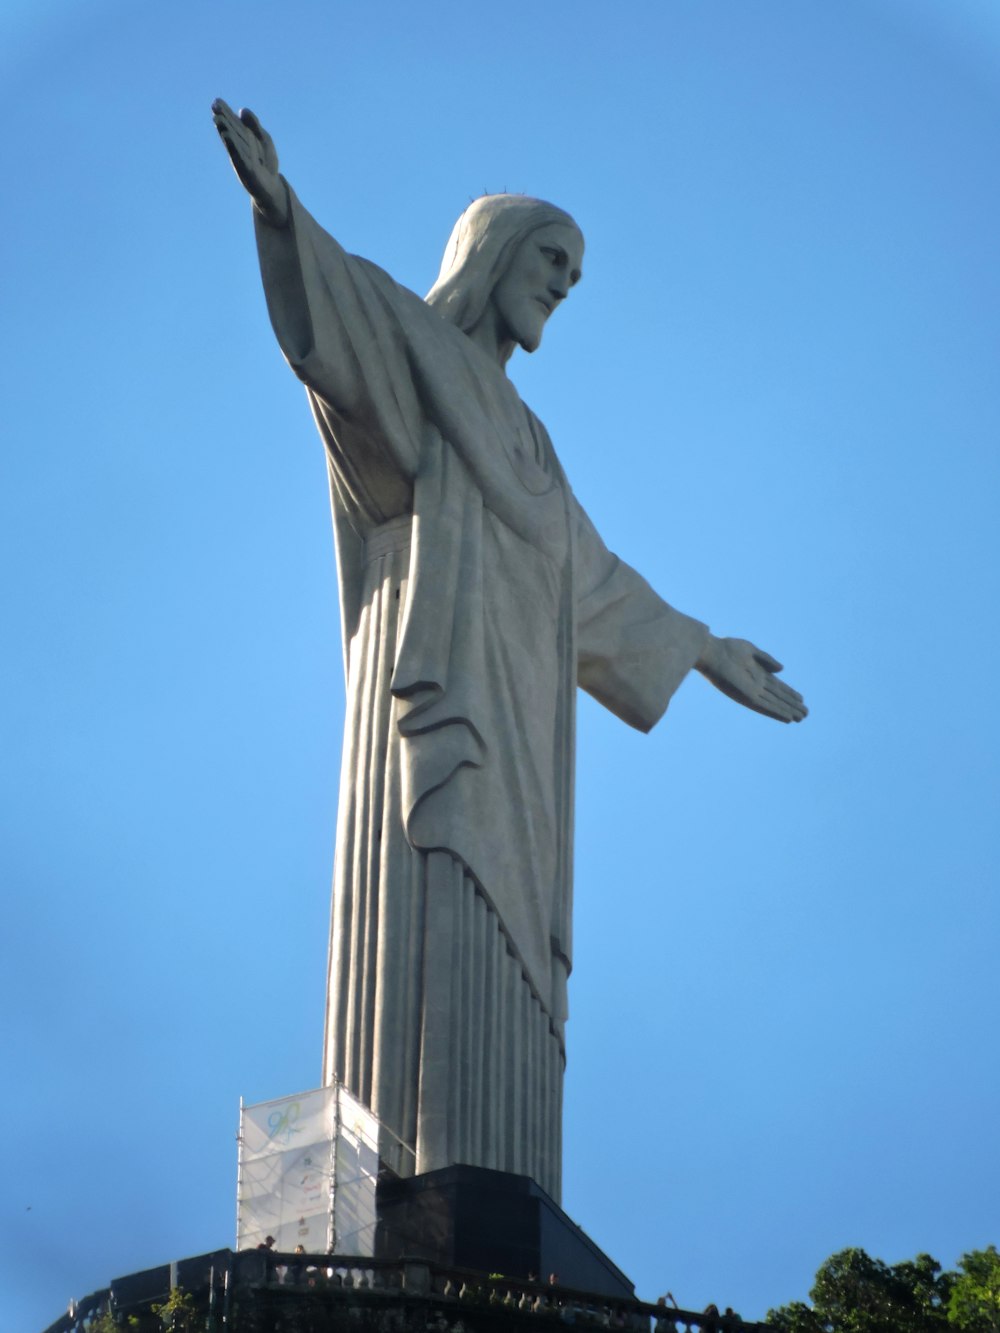 the statue of jesus is in the middle of a clear blue sky